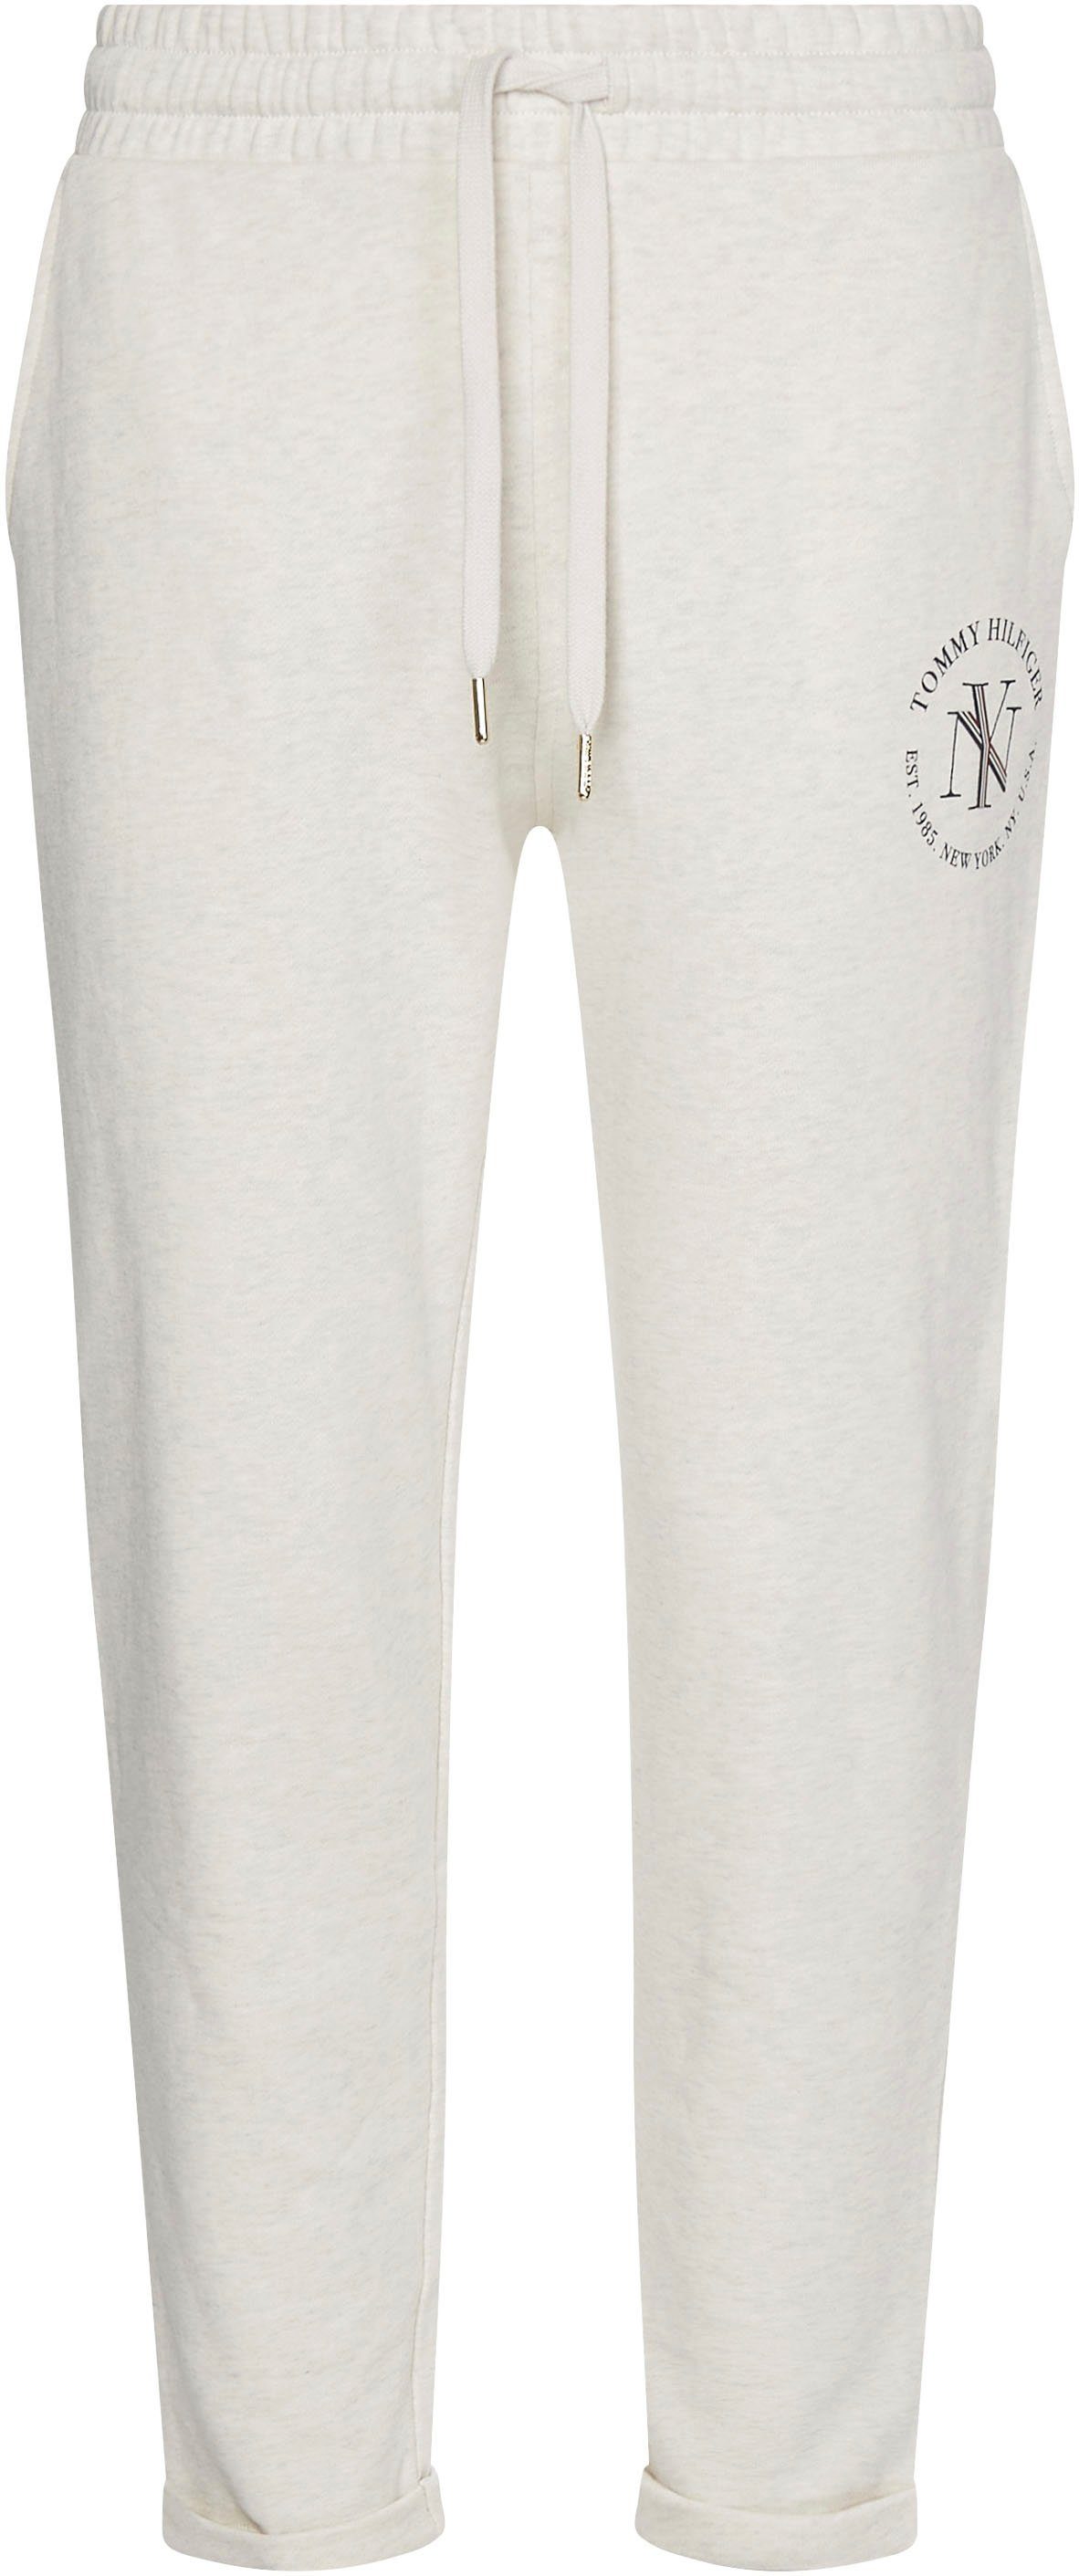 Tommy Hilfiger Sweatpants Tommy TAPERED NYC Markenlabel White-Heather mit Hilfiger ROUNDALL SWEATPANTS